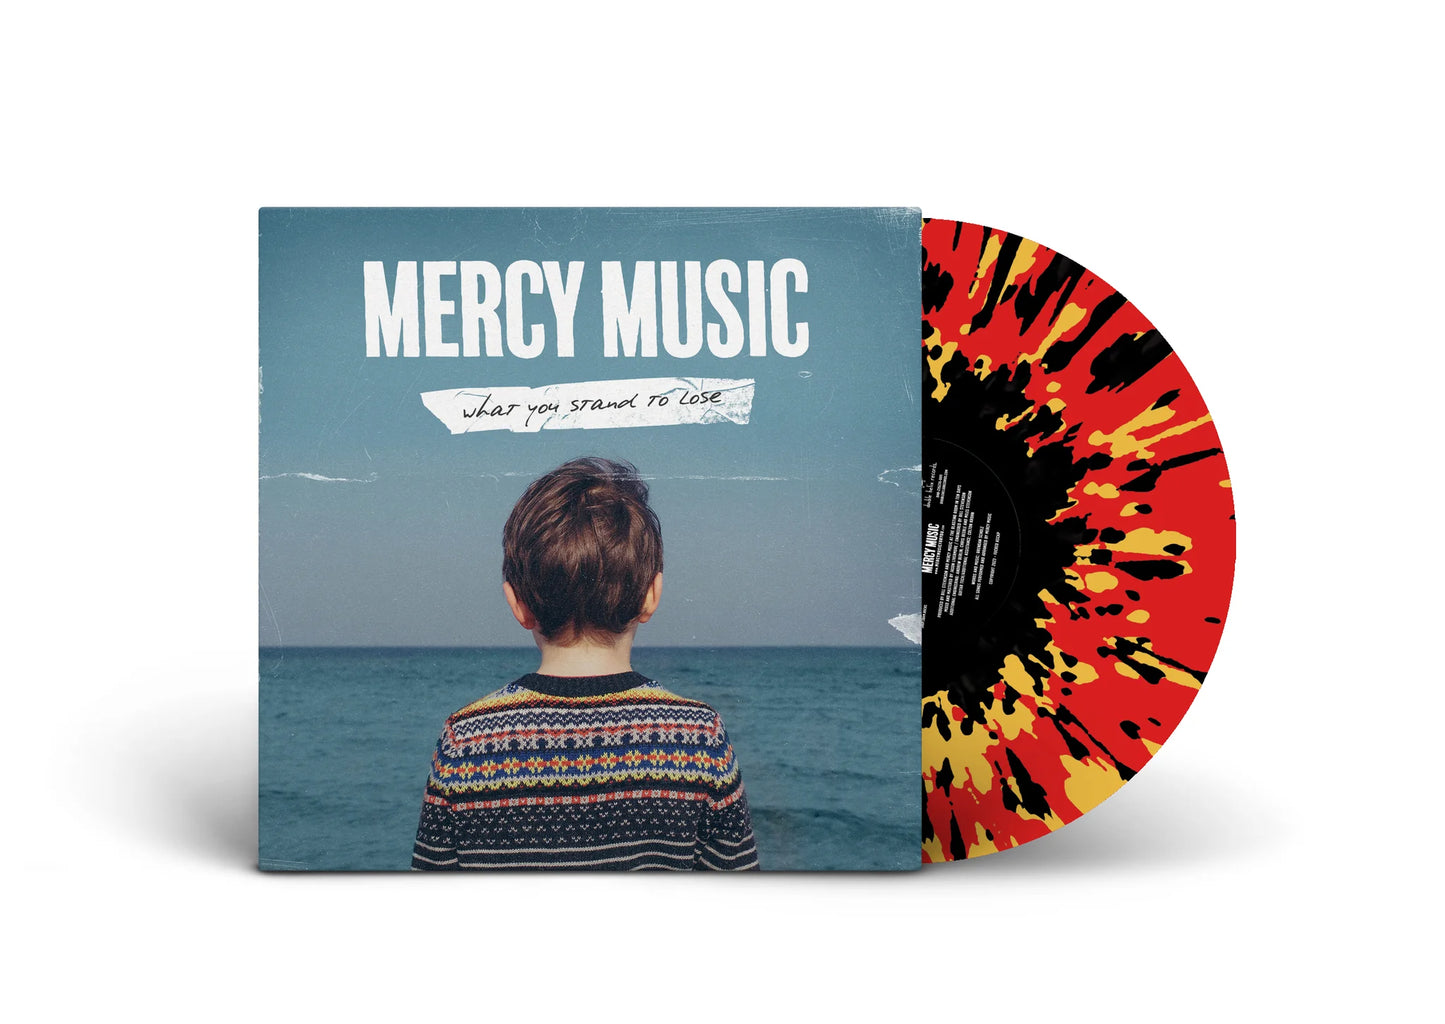 MERCY MUSIC - "What You Stand To Lose" (SBAM) (LP)